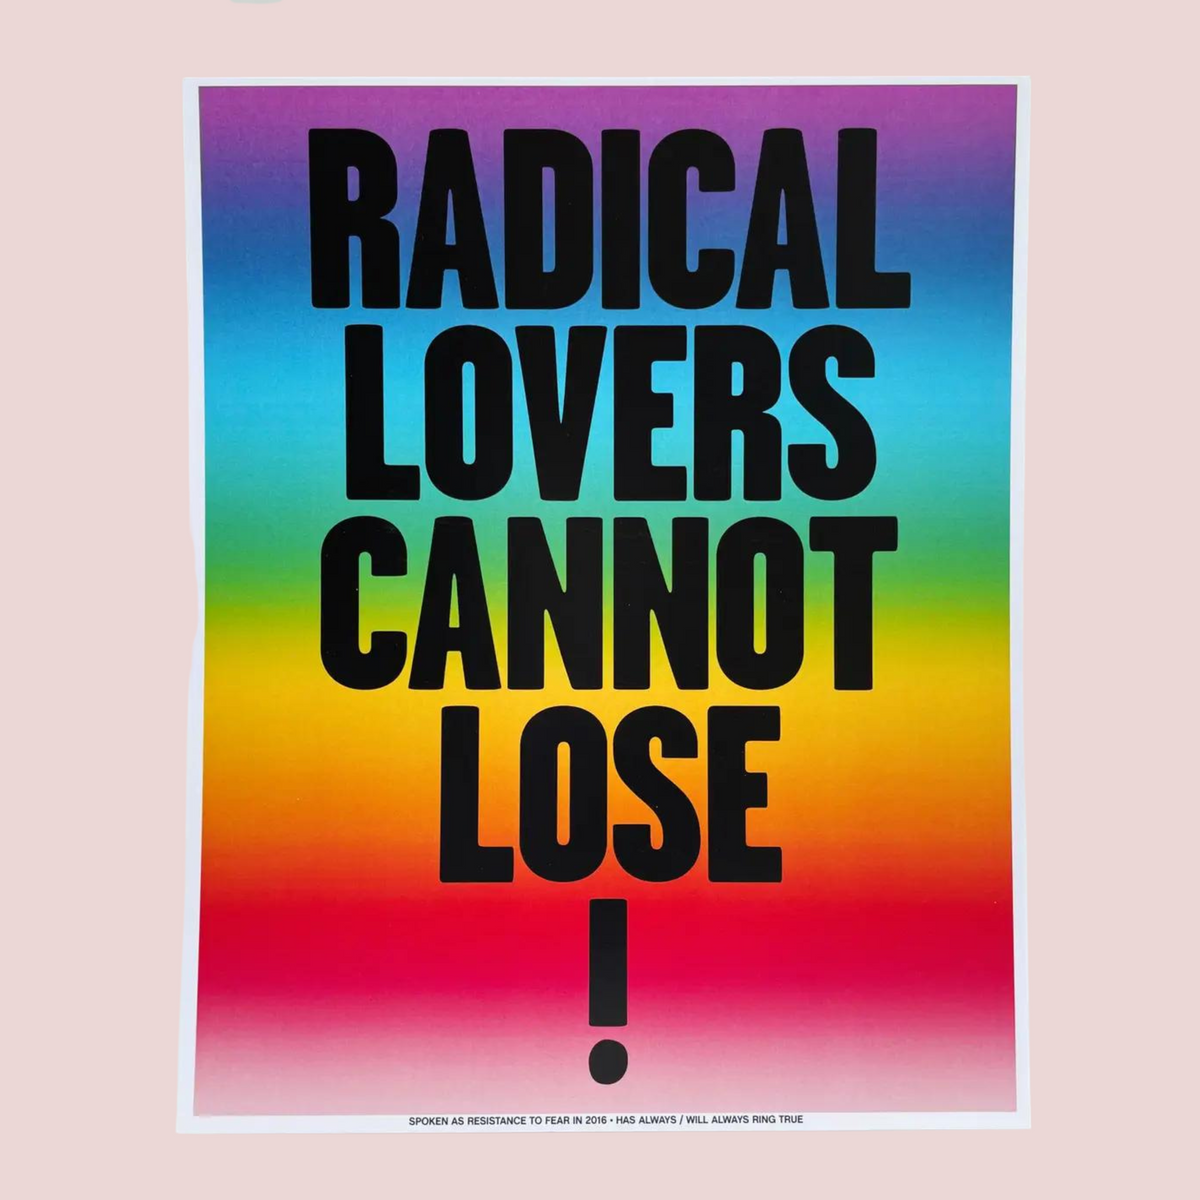 Radical Lovers Cannot Lose! Print